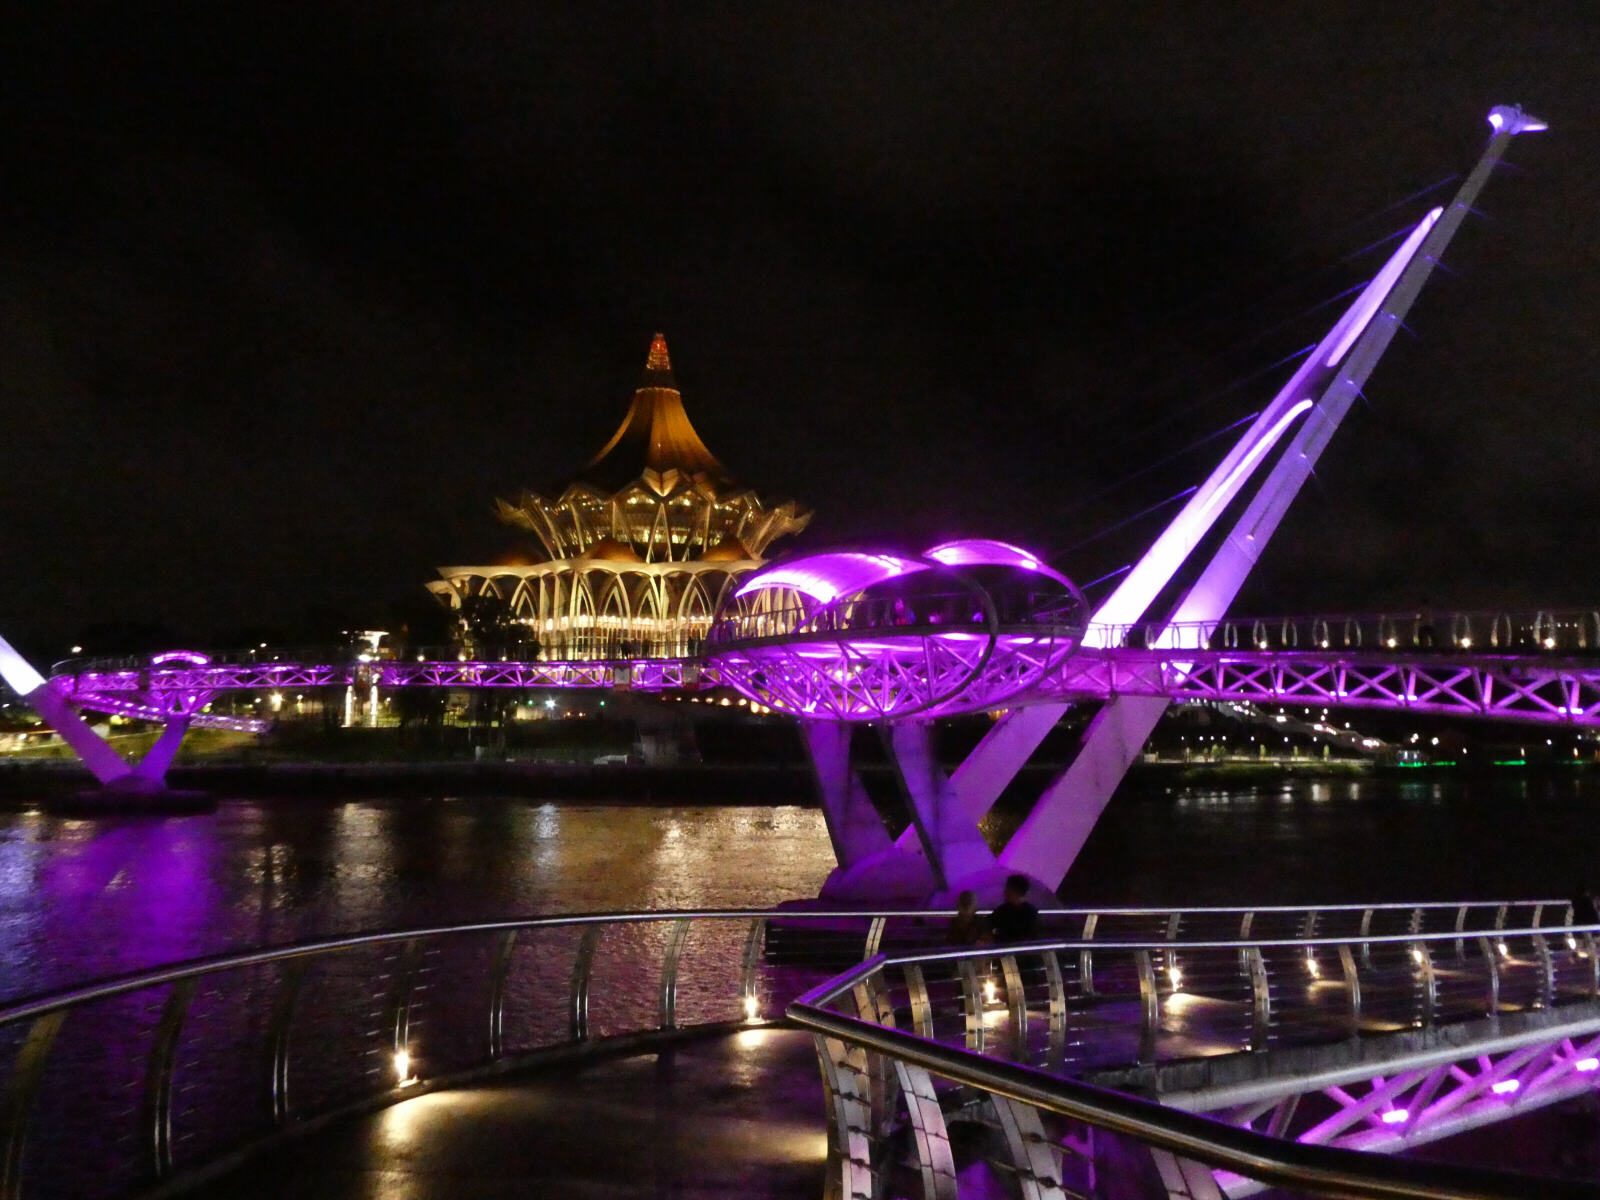 Light show on Kuching bridge and government building